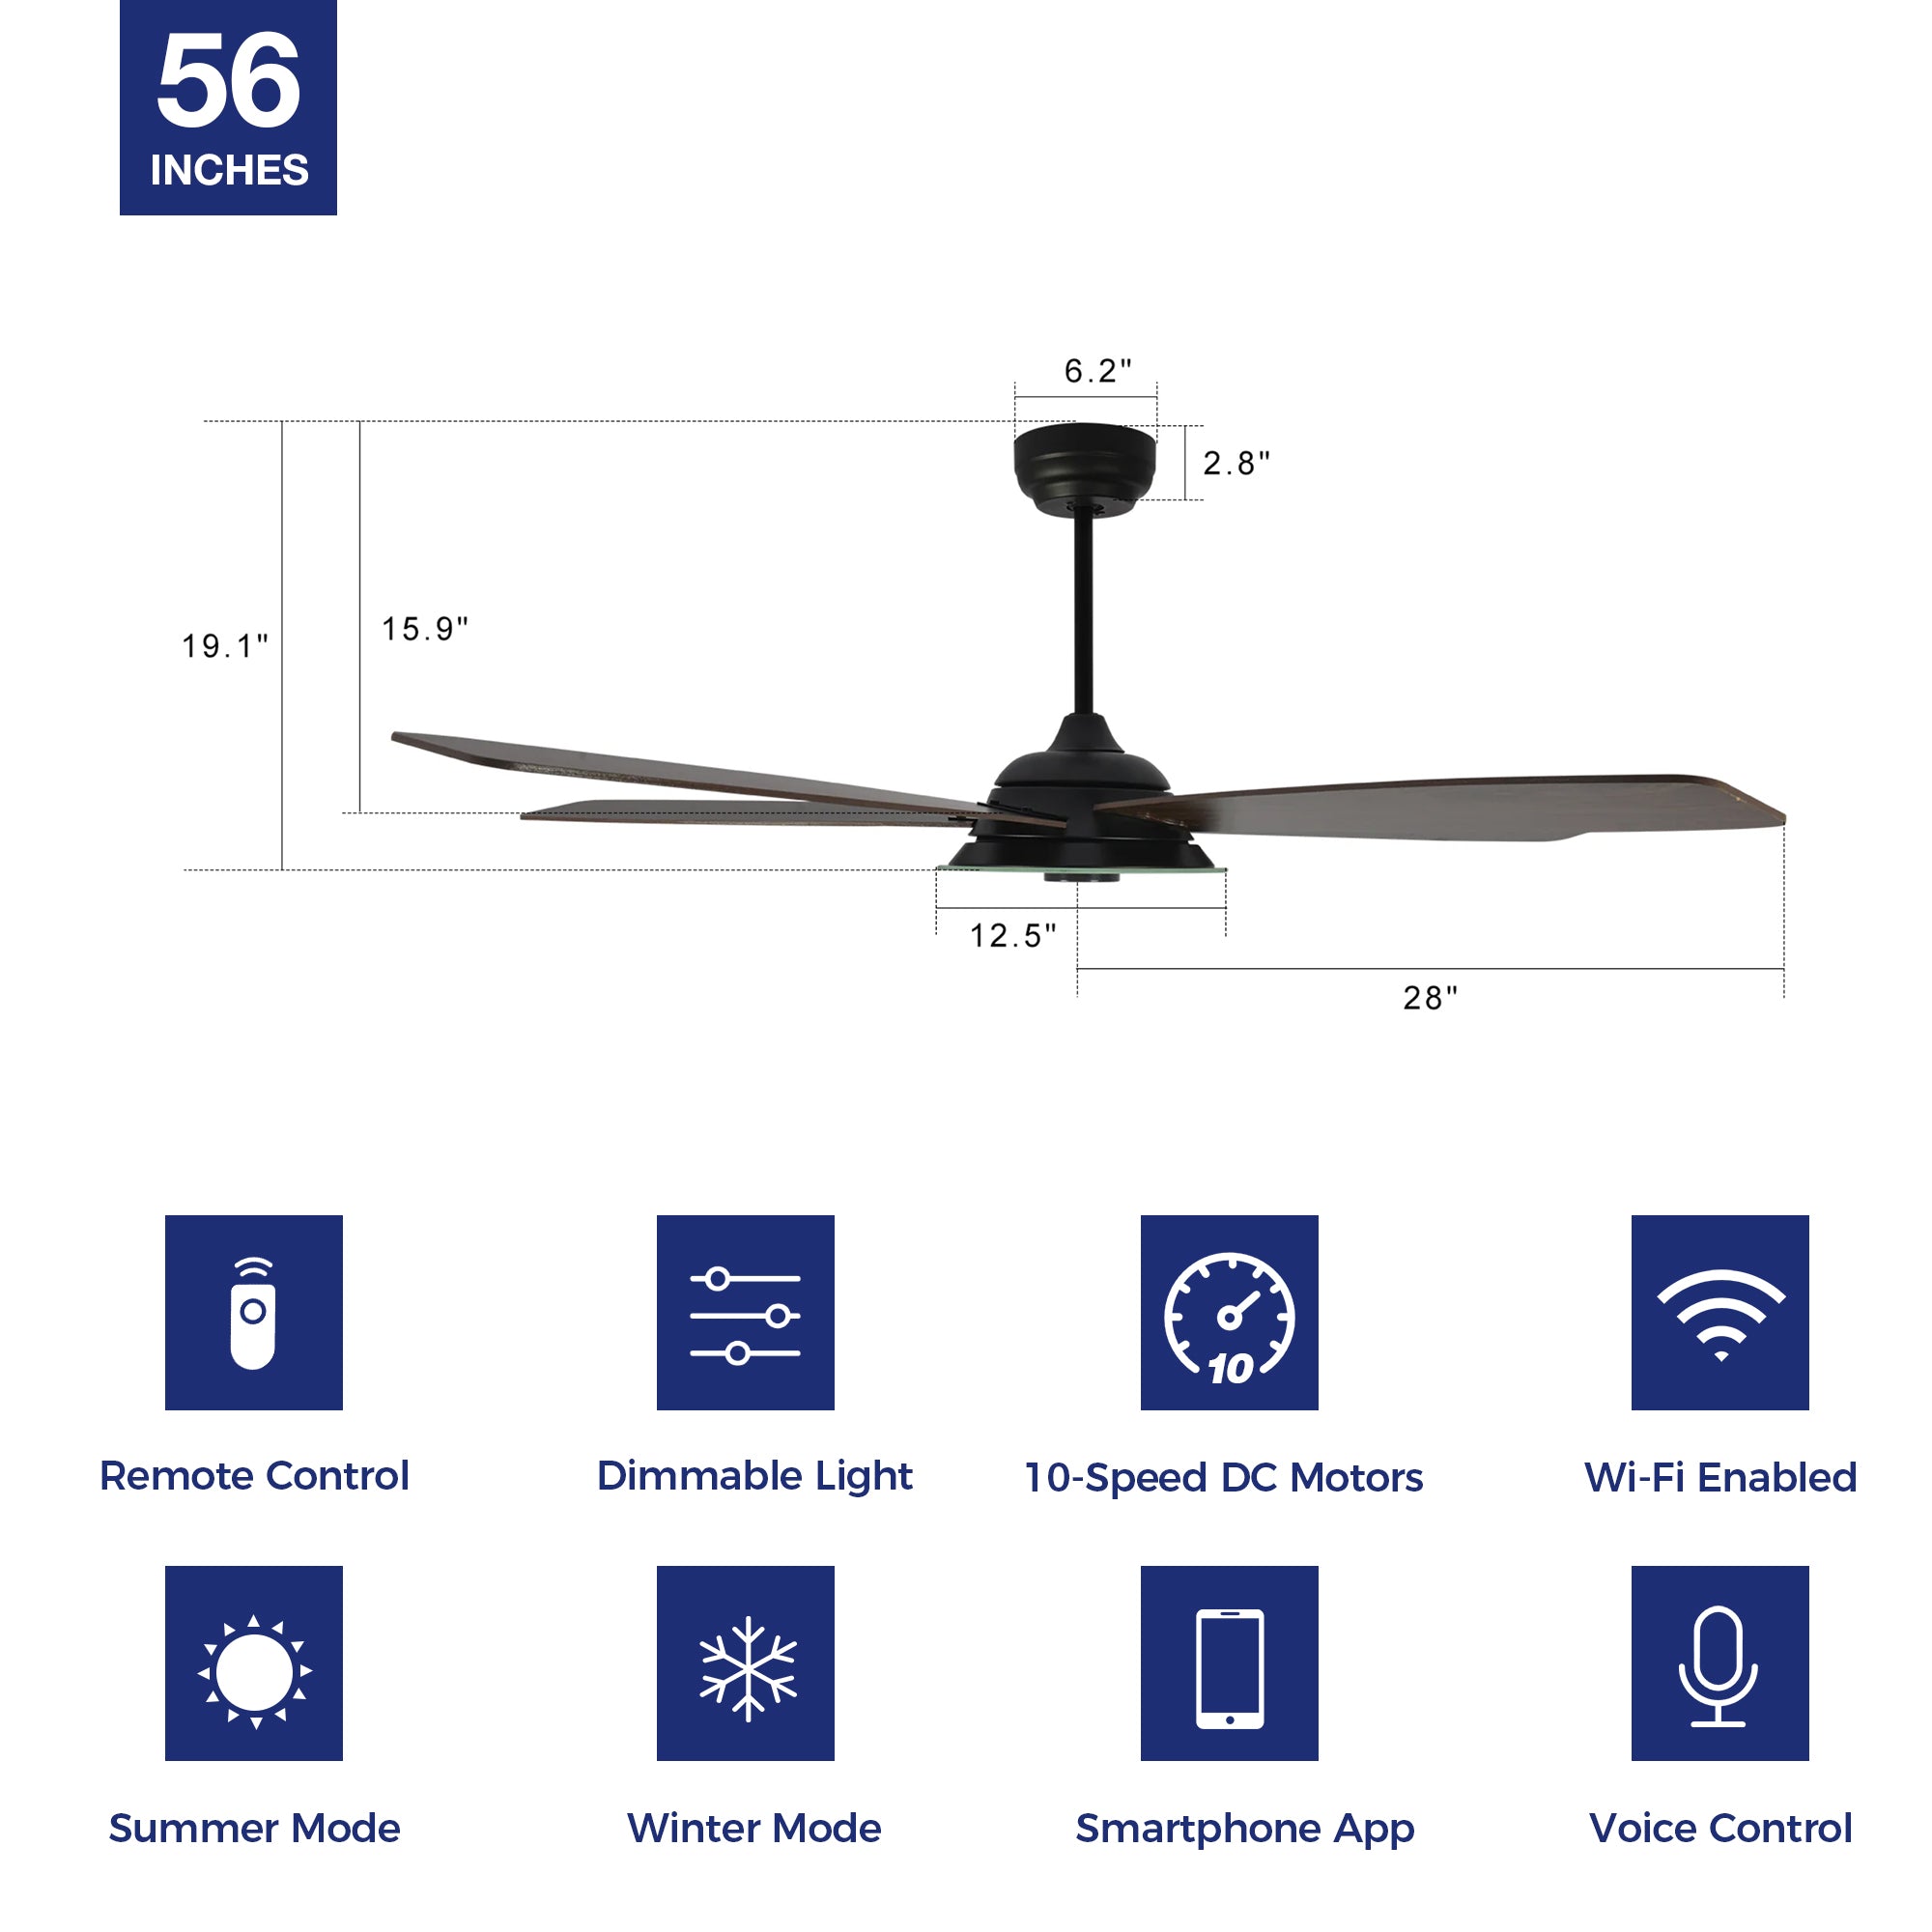 Striker Outdoor 56&quot; Smart Ceiling Fan with LED Light Kit-Black Case and Dark Wood Fan Blades. The fan features Remote control, Wi-Fi apps, and Voice control technology (compatible with Amazon Alexa and Google Home Assistant ) to set fan preferences. Equipped with 3576-lumen dimmable LED lights and a 10-speed DC Motor (5600CFM airflow output), it brings you cool and bright. 